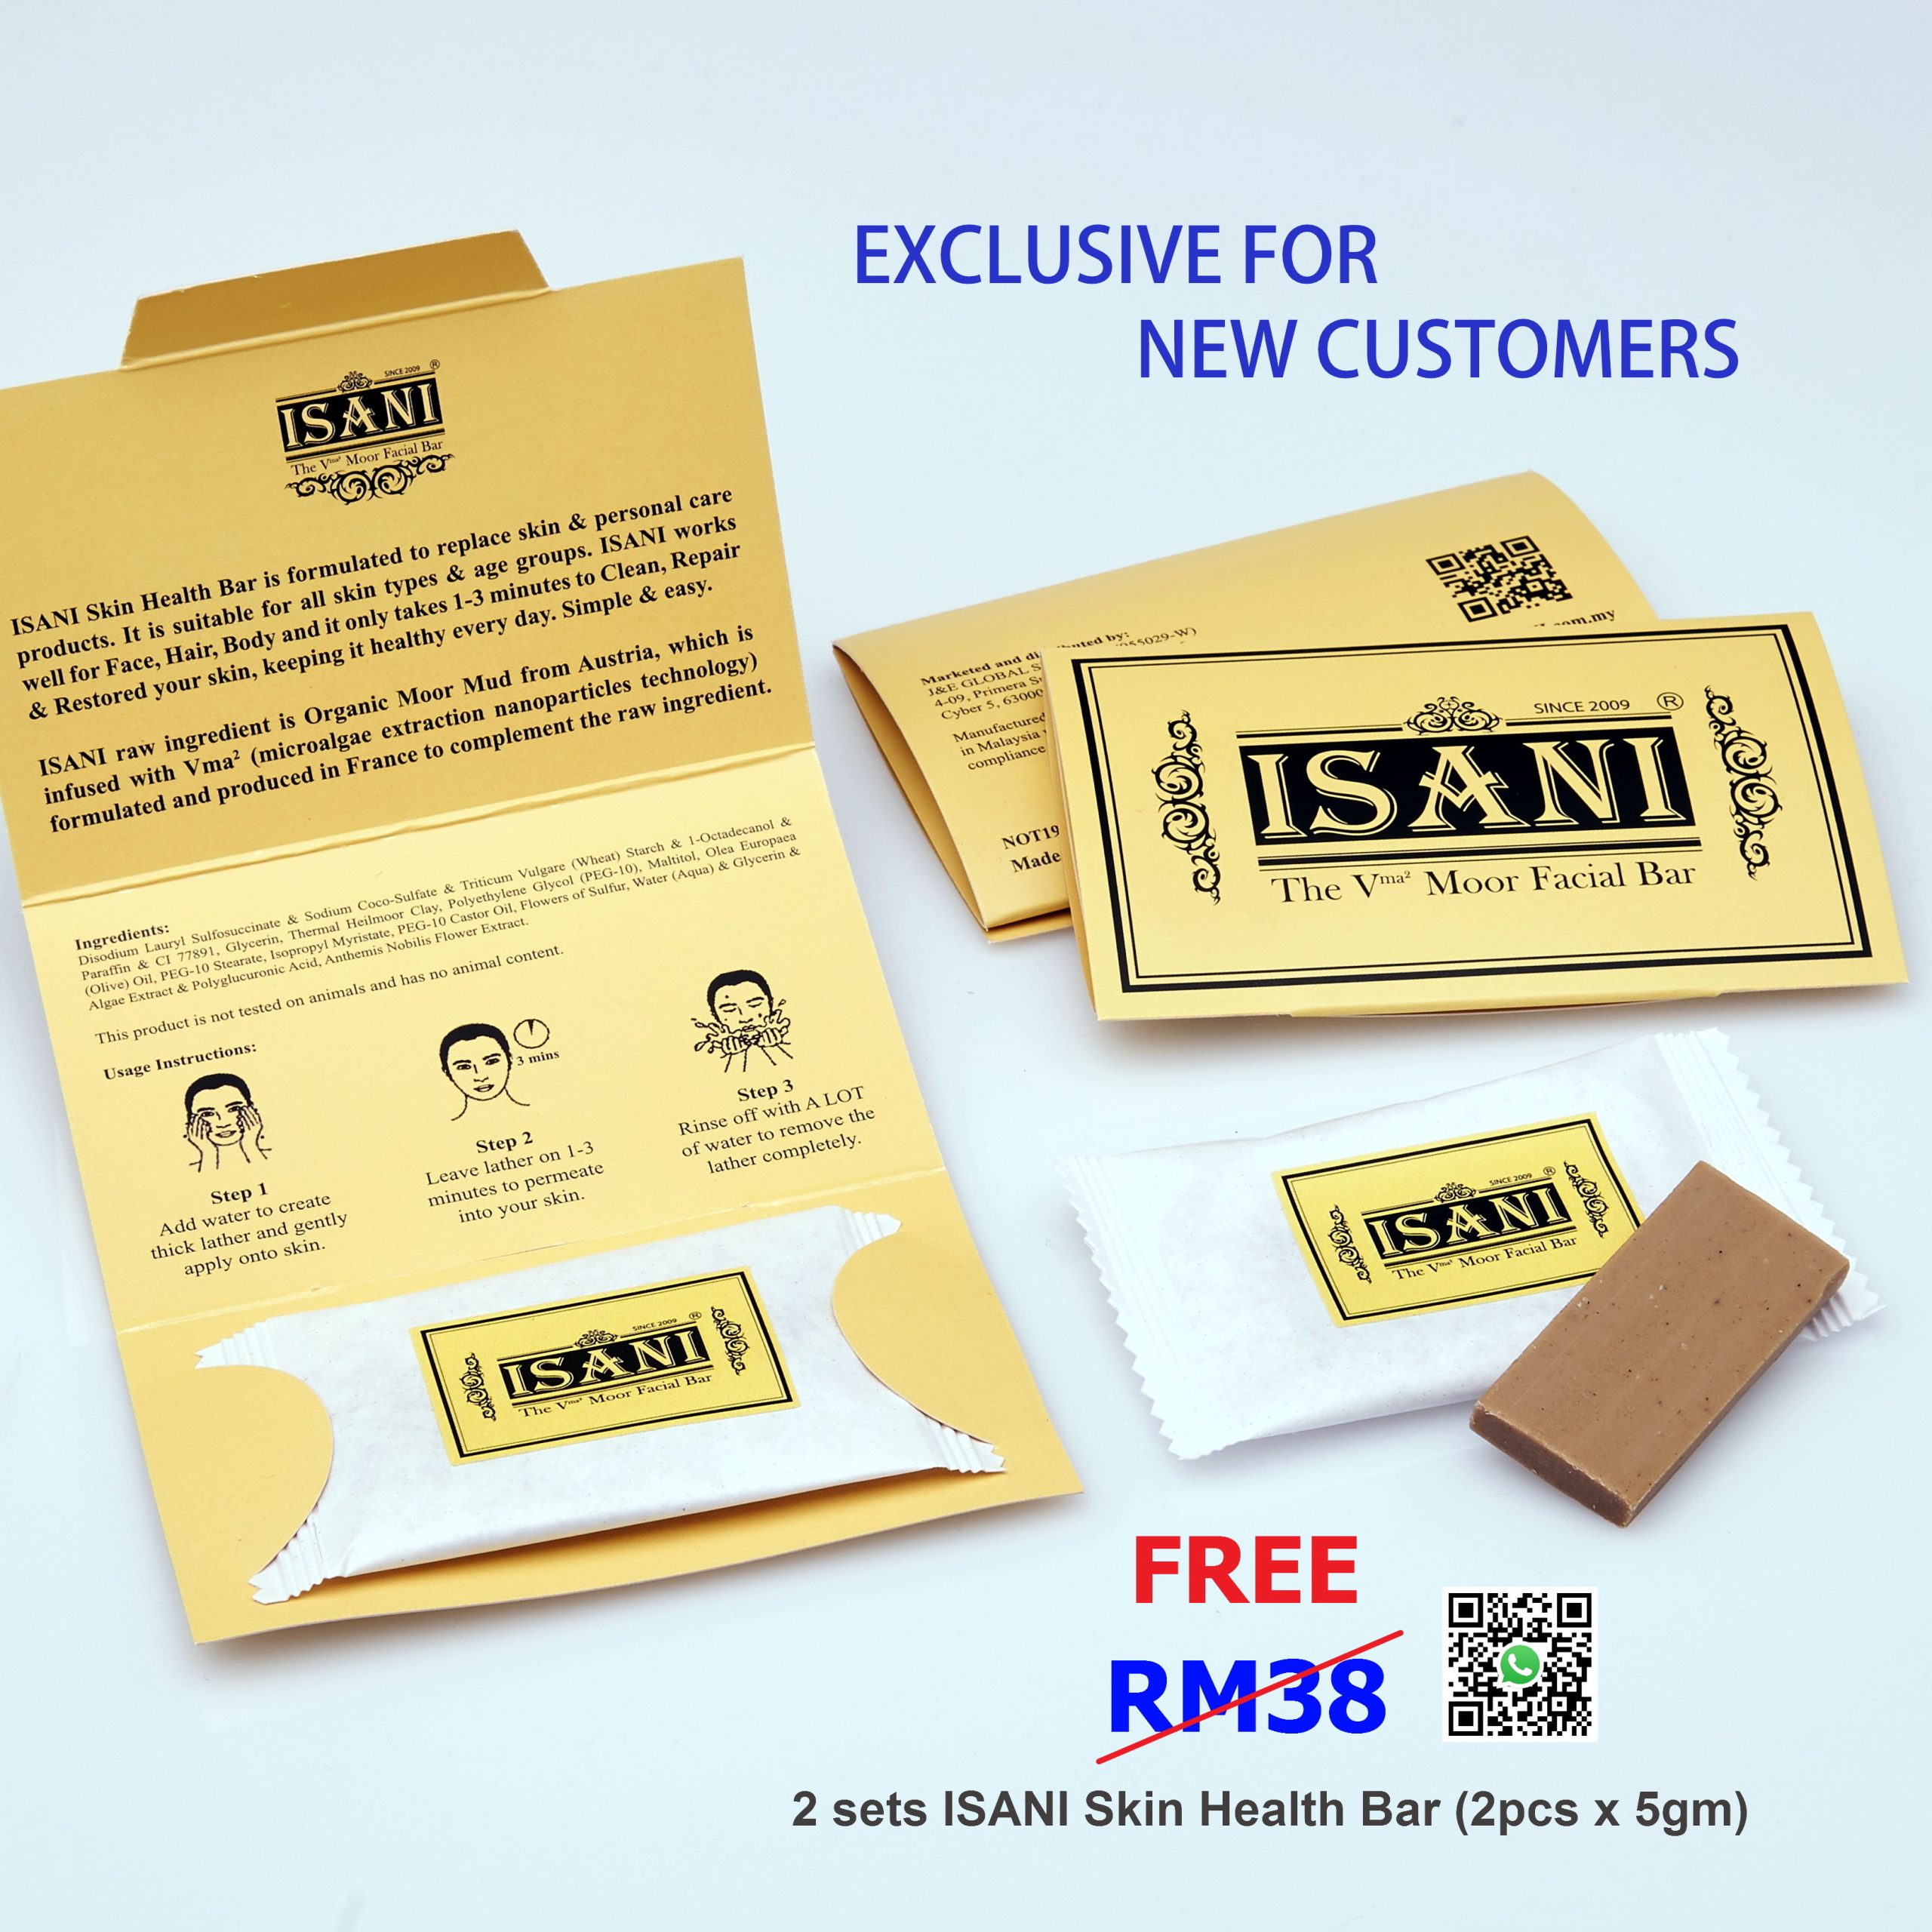 Free 2 sets ISANI exclusive for New Customer- WS